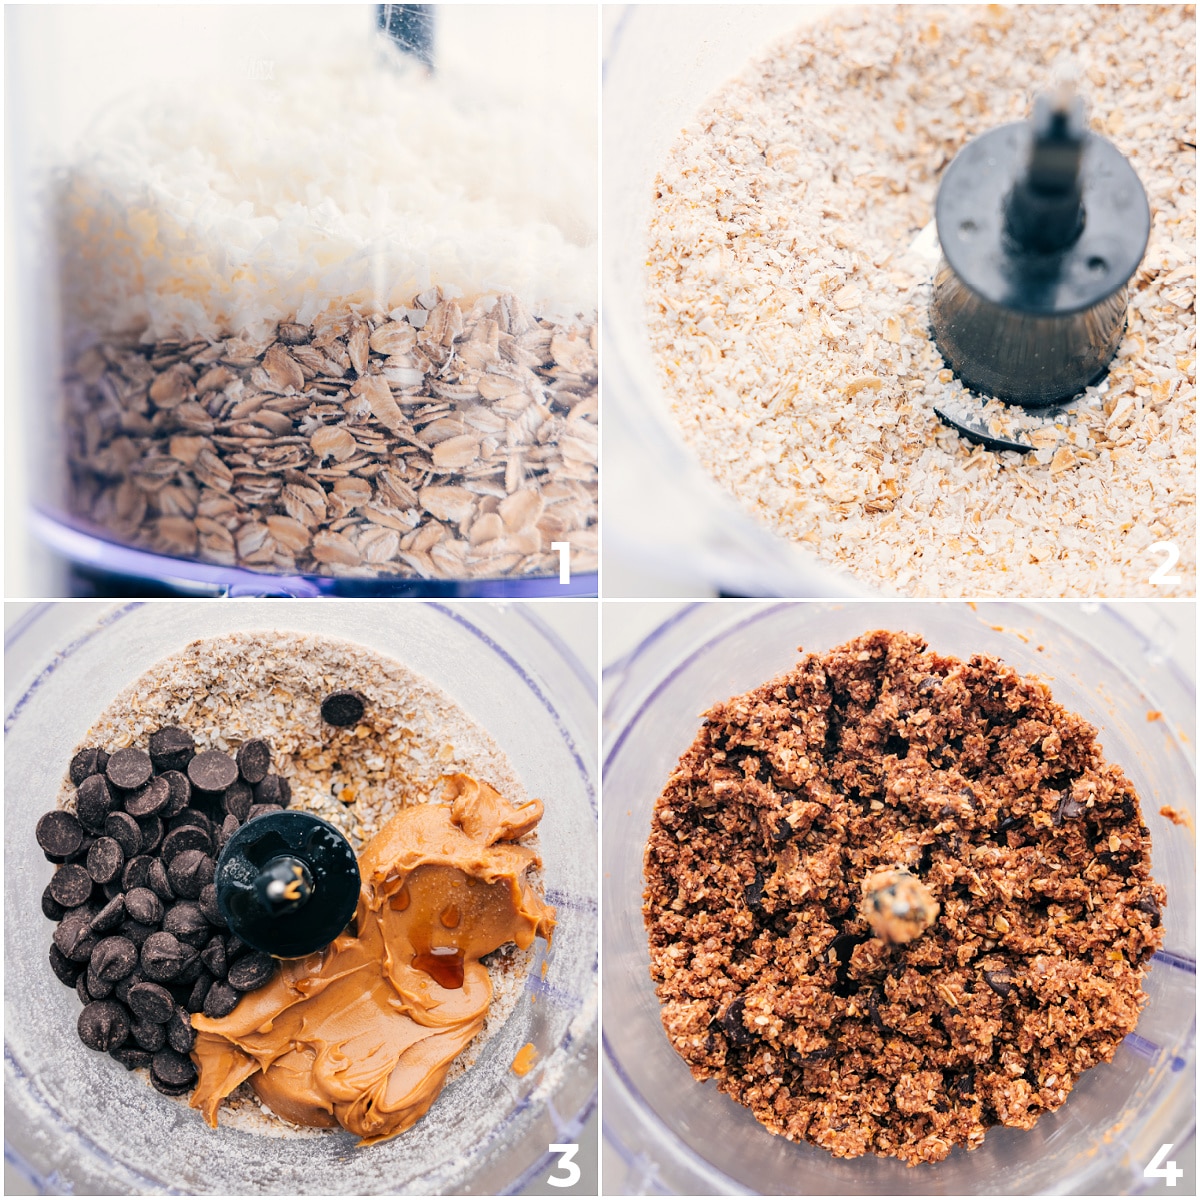 All the base ingredients being added to a food processor and blended together.